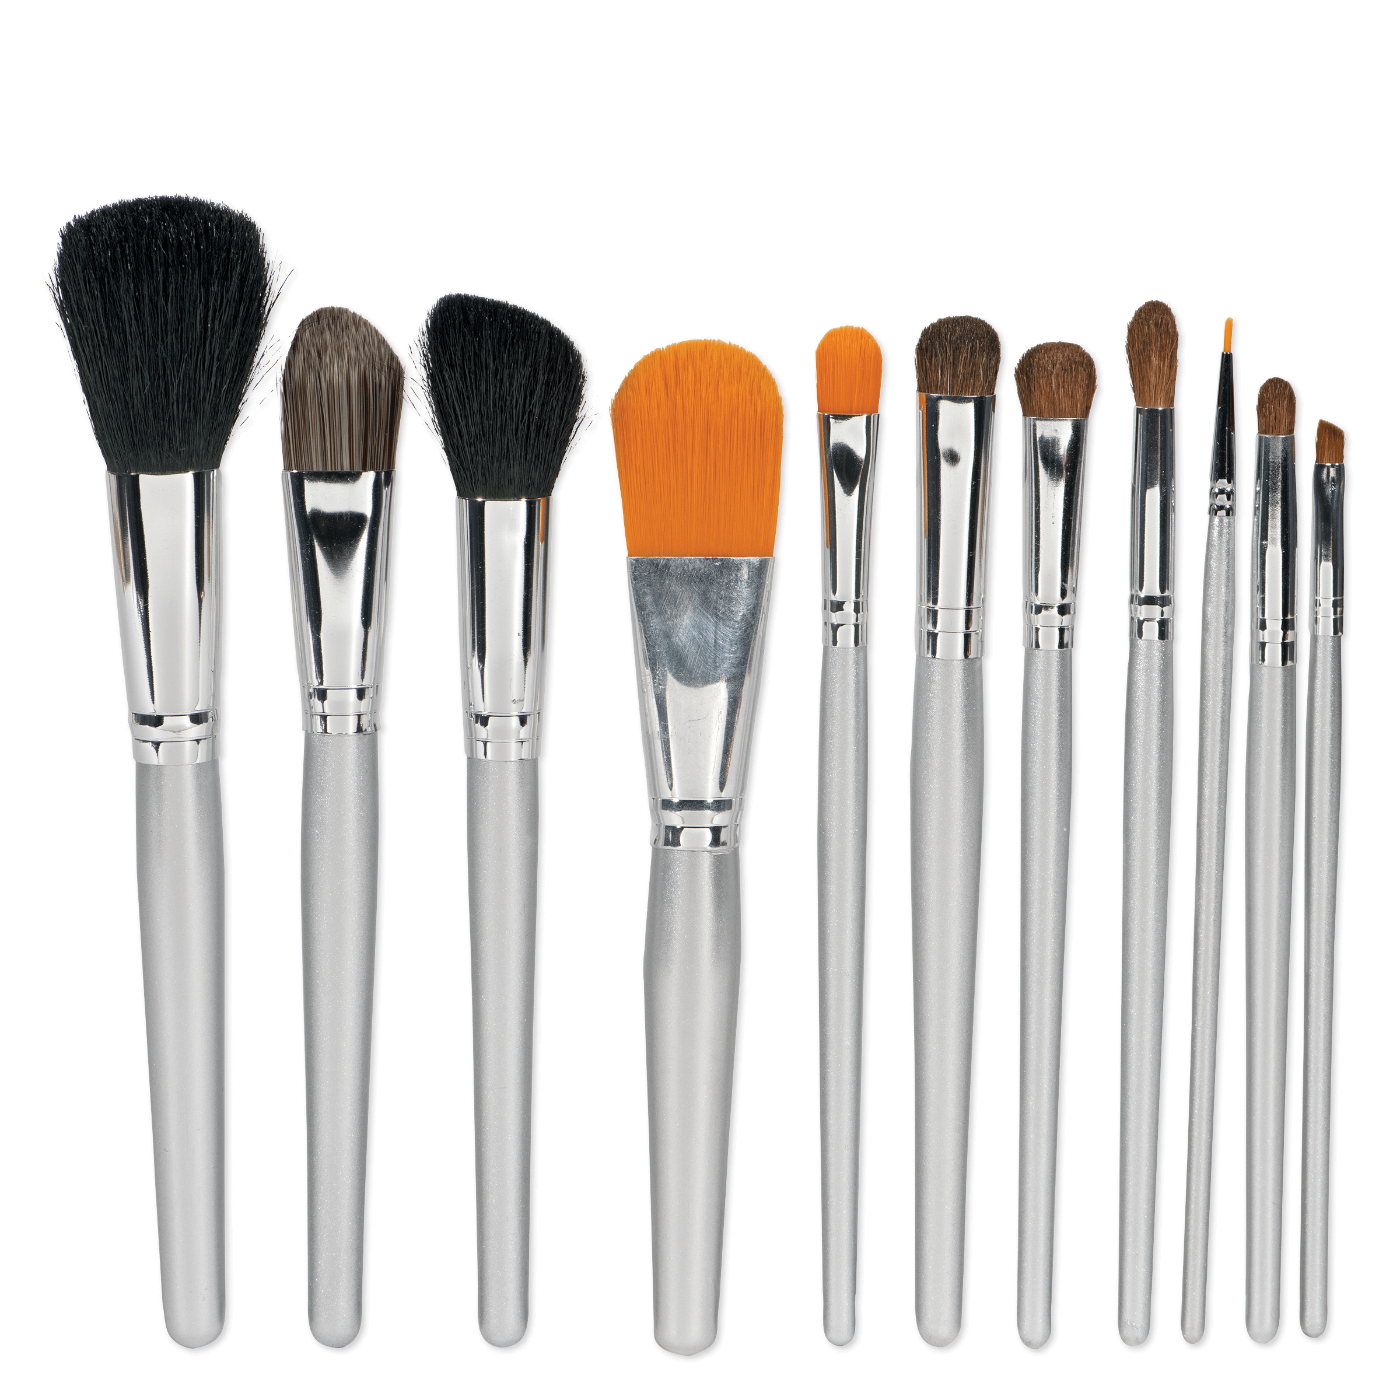 Makeup Brush Set with Case - 11 pc.